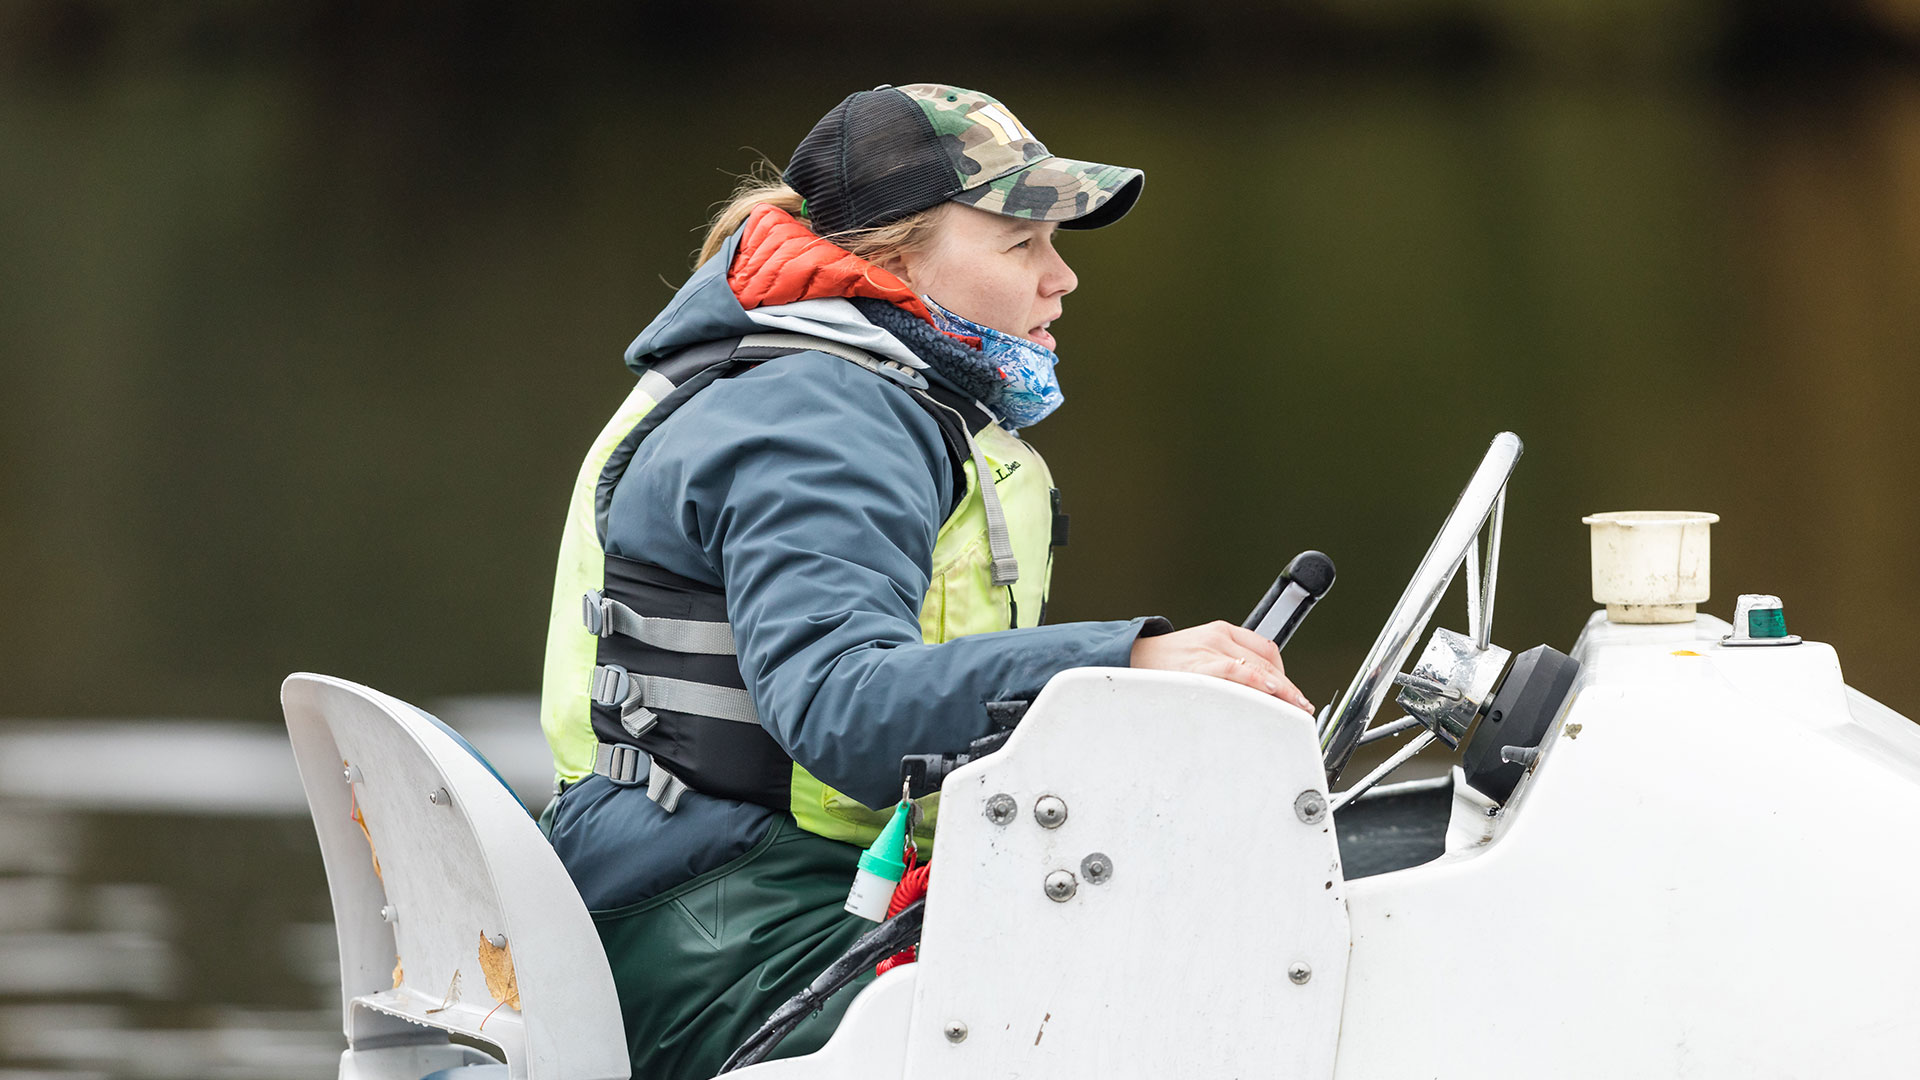 crew coach steering a boat 